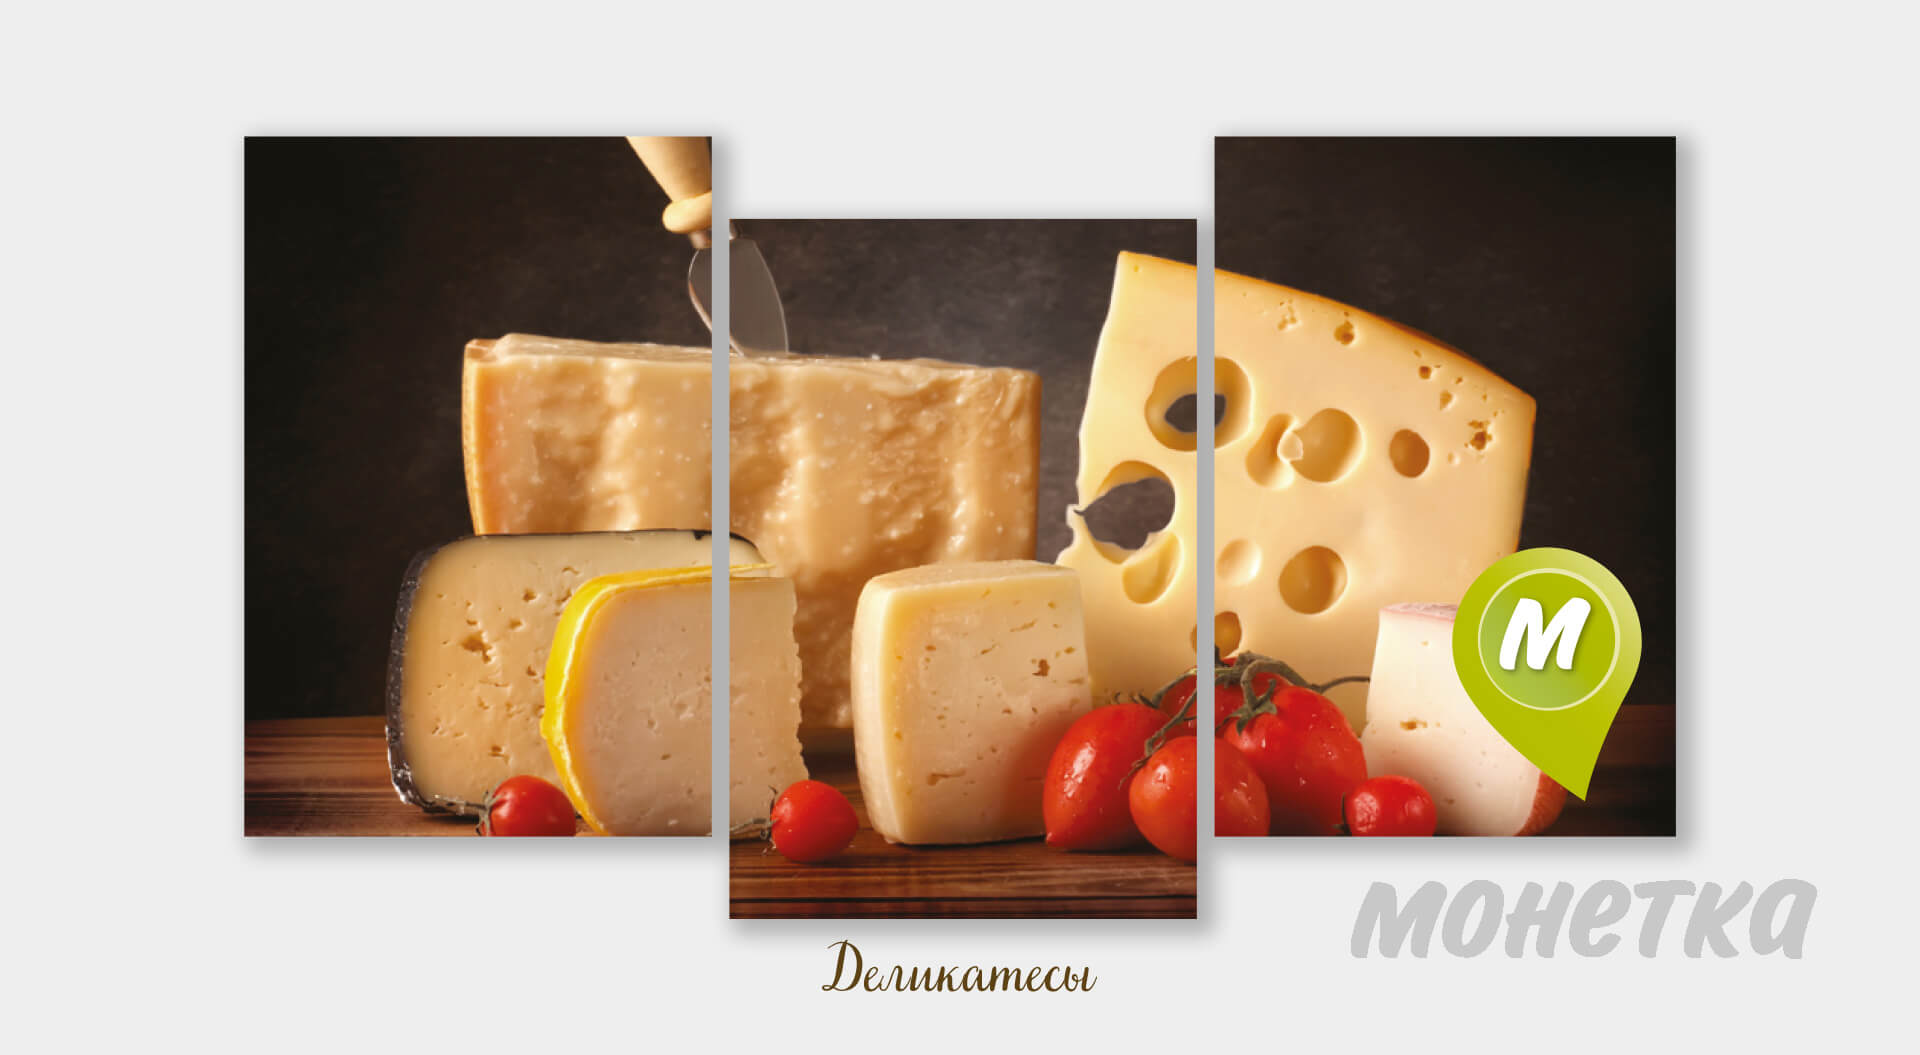 Monetka Supermarkets, Monetka Supermarkets, Speciality Cheese graphics and branding - Campbell Rigg Agency